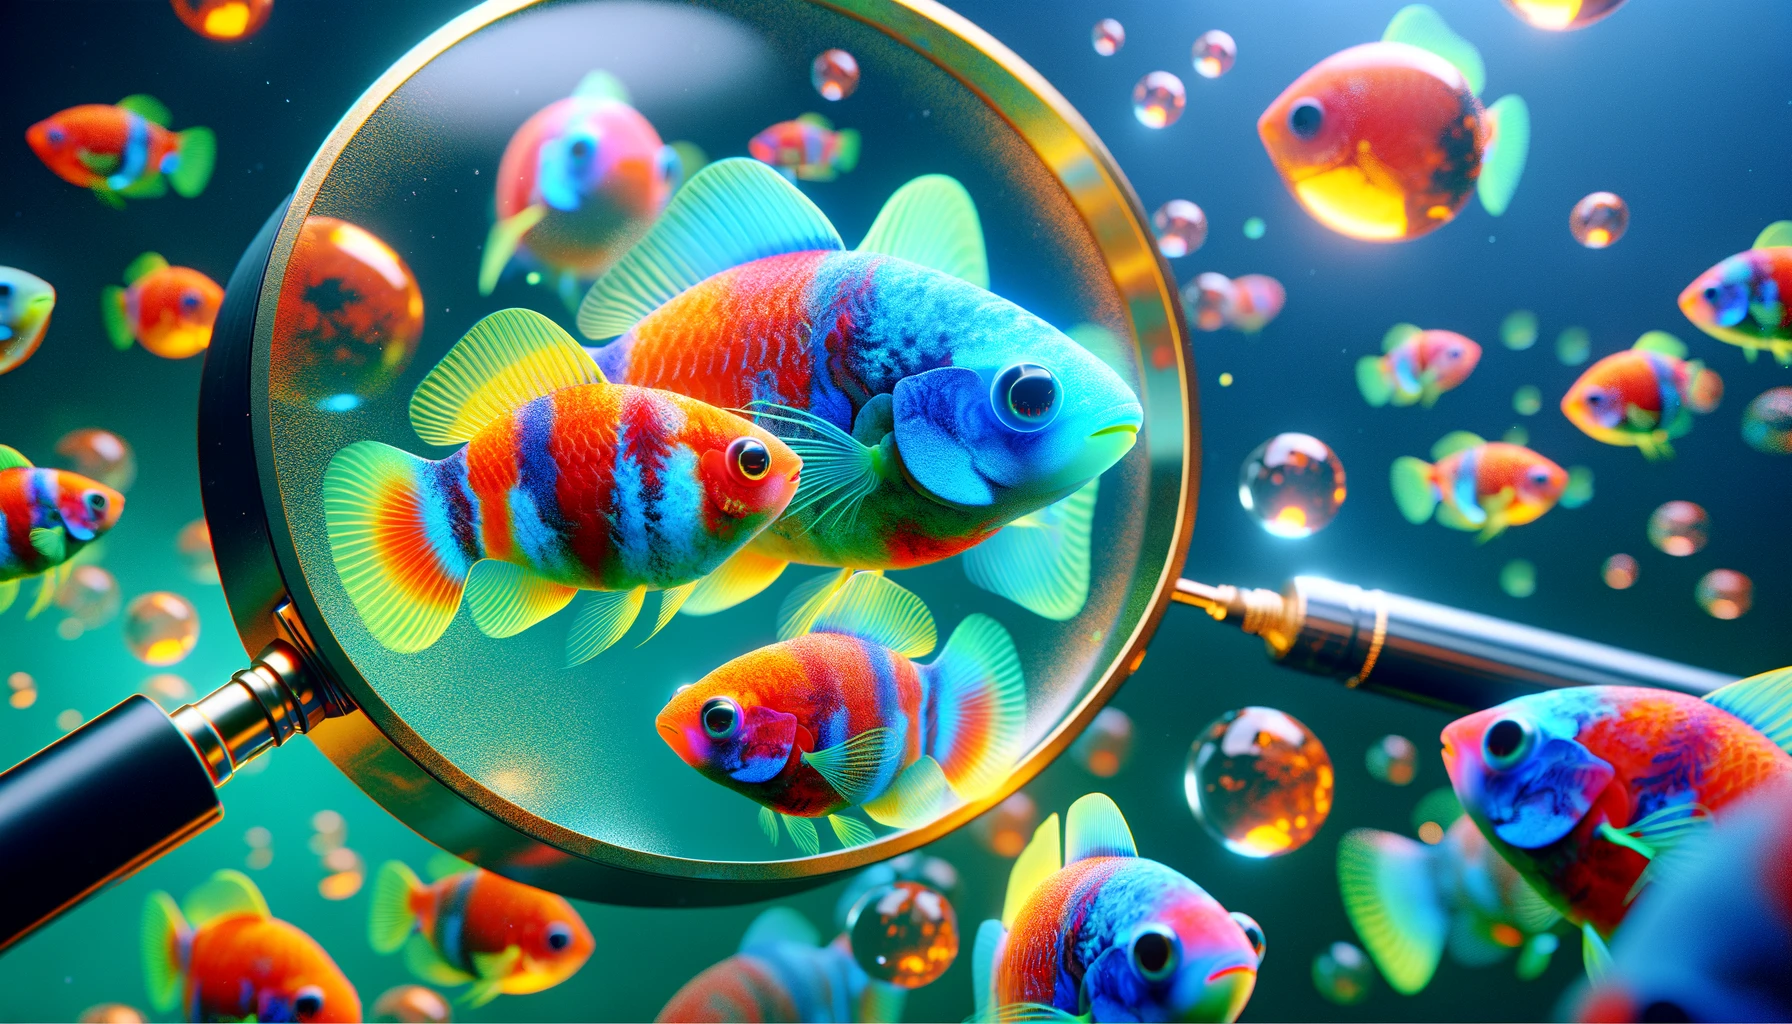 Choosing Healthy and Suitable Parent Fish' for GloFish breeding. The image should